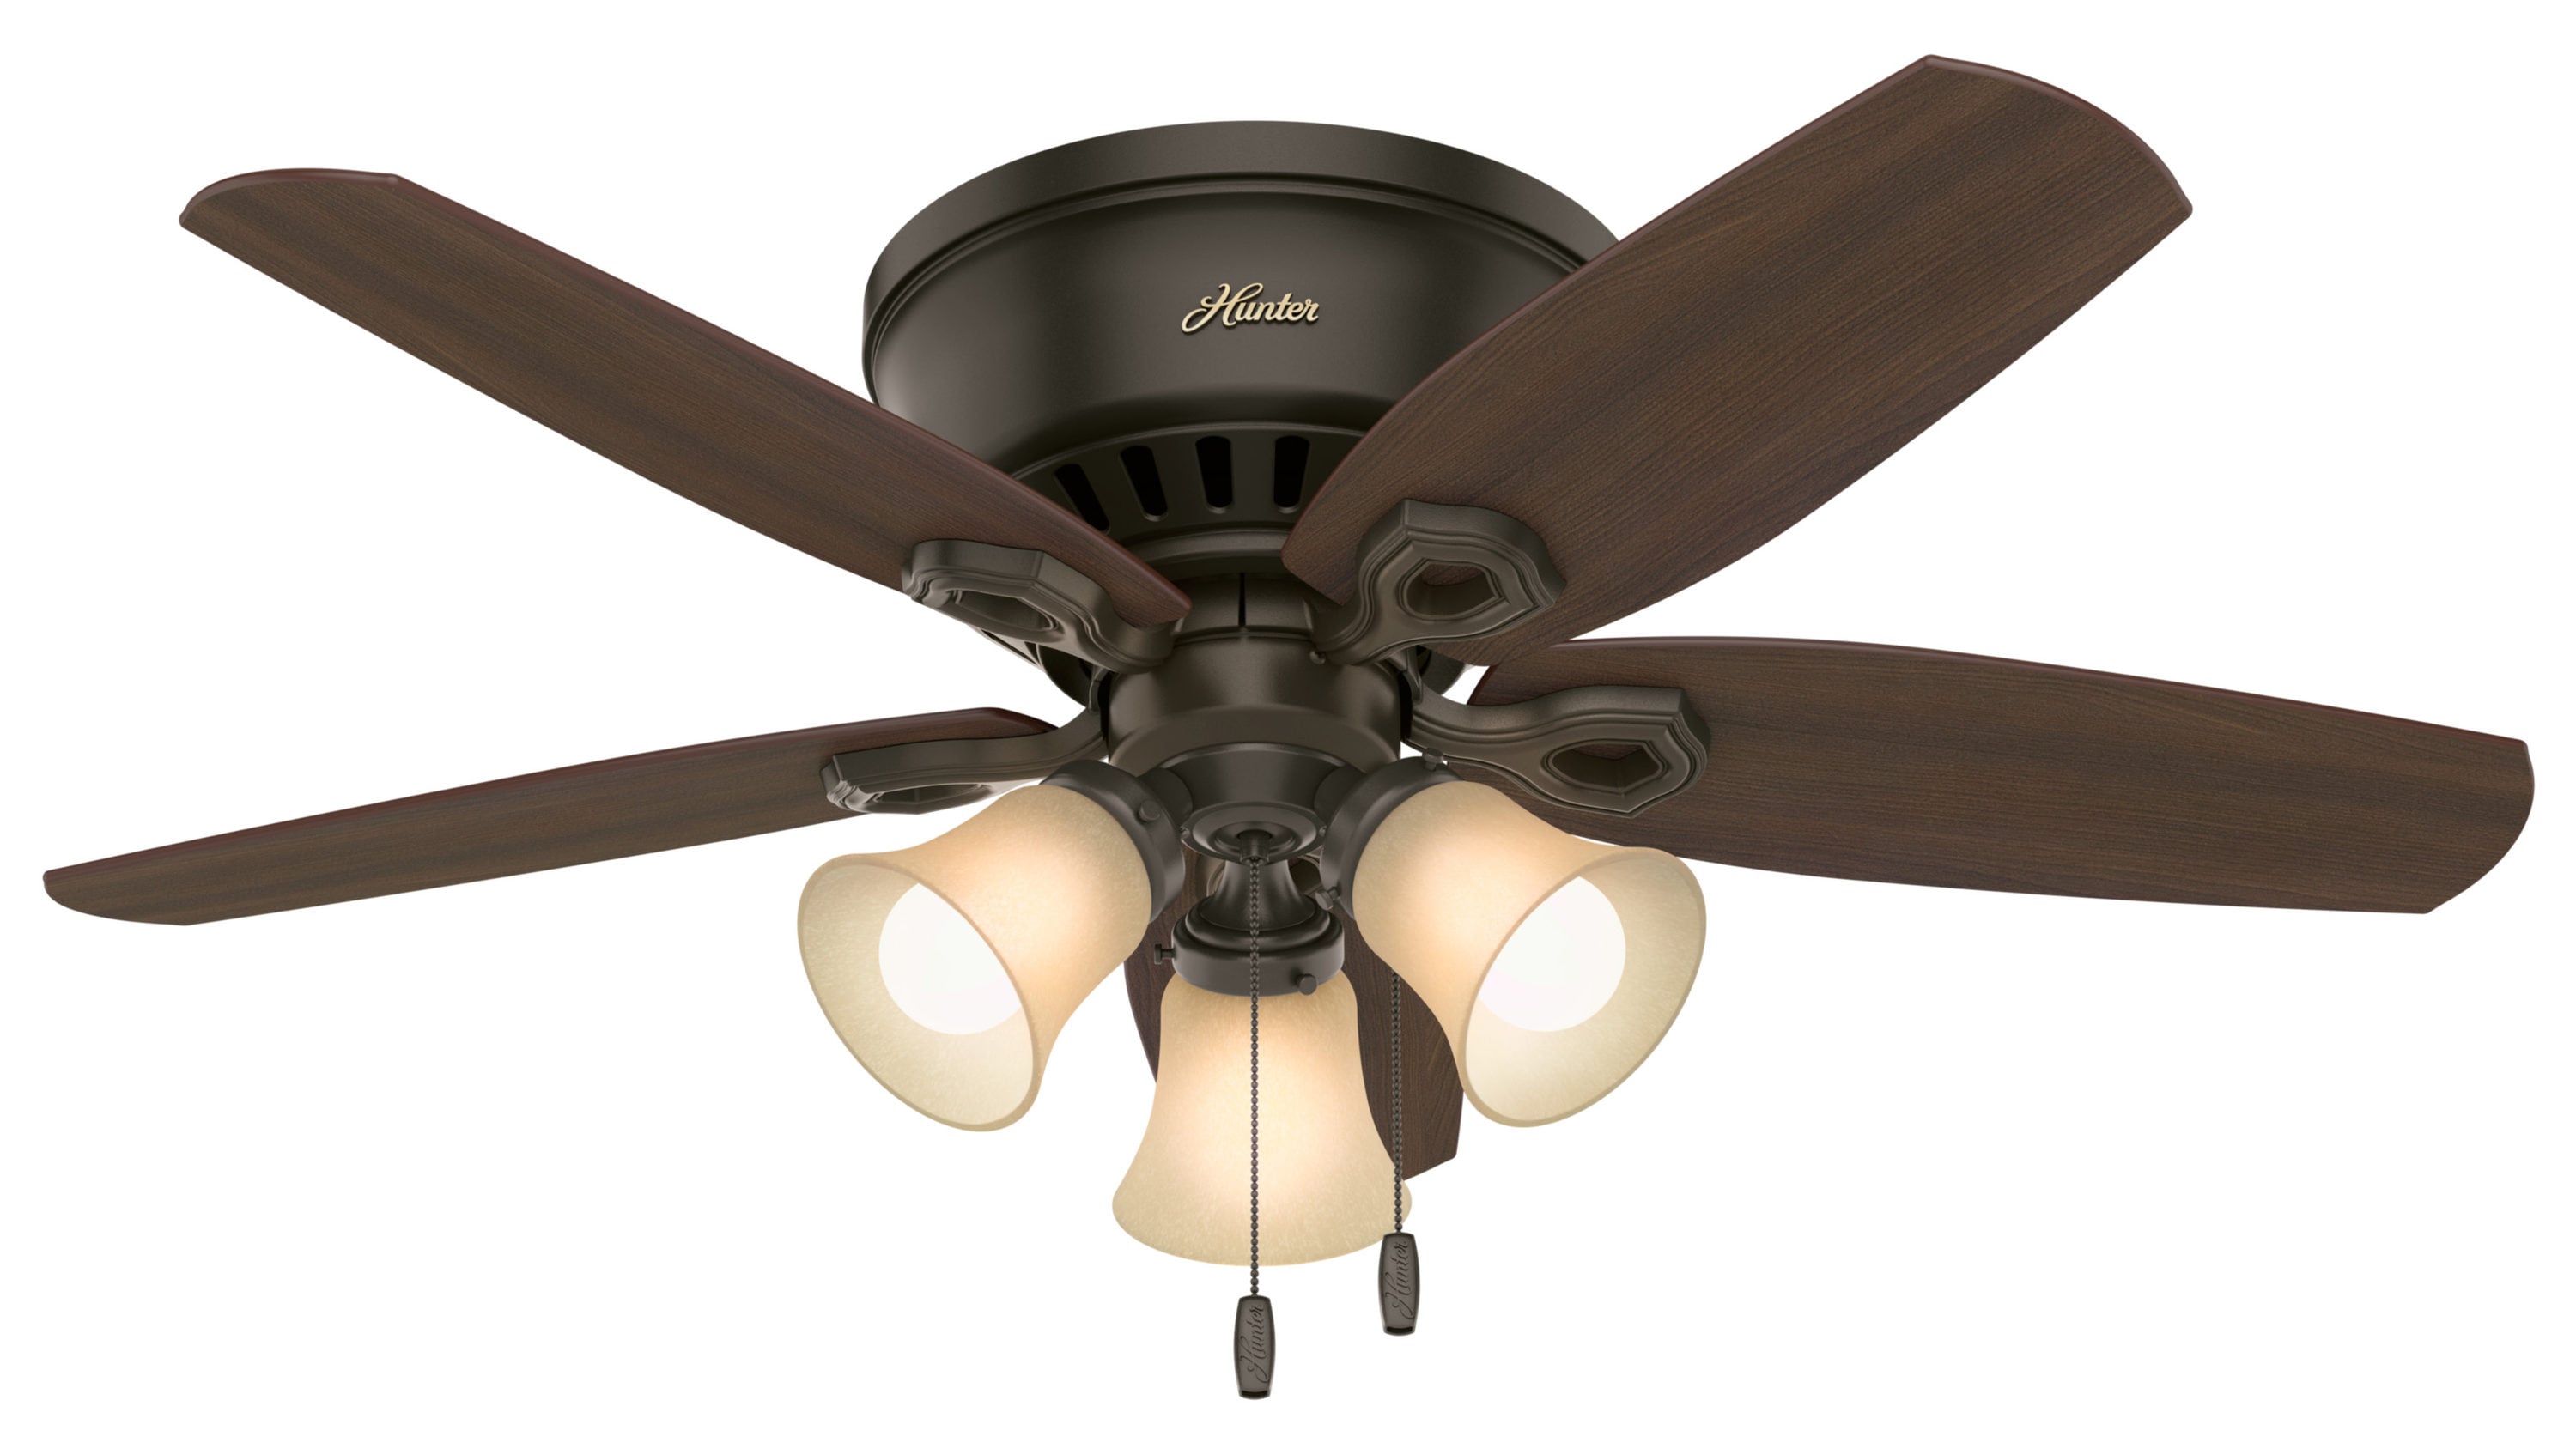 42" Antique Brass 1 Light Indoor Ceiling Fan with Light Kit 